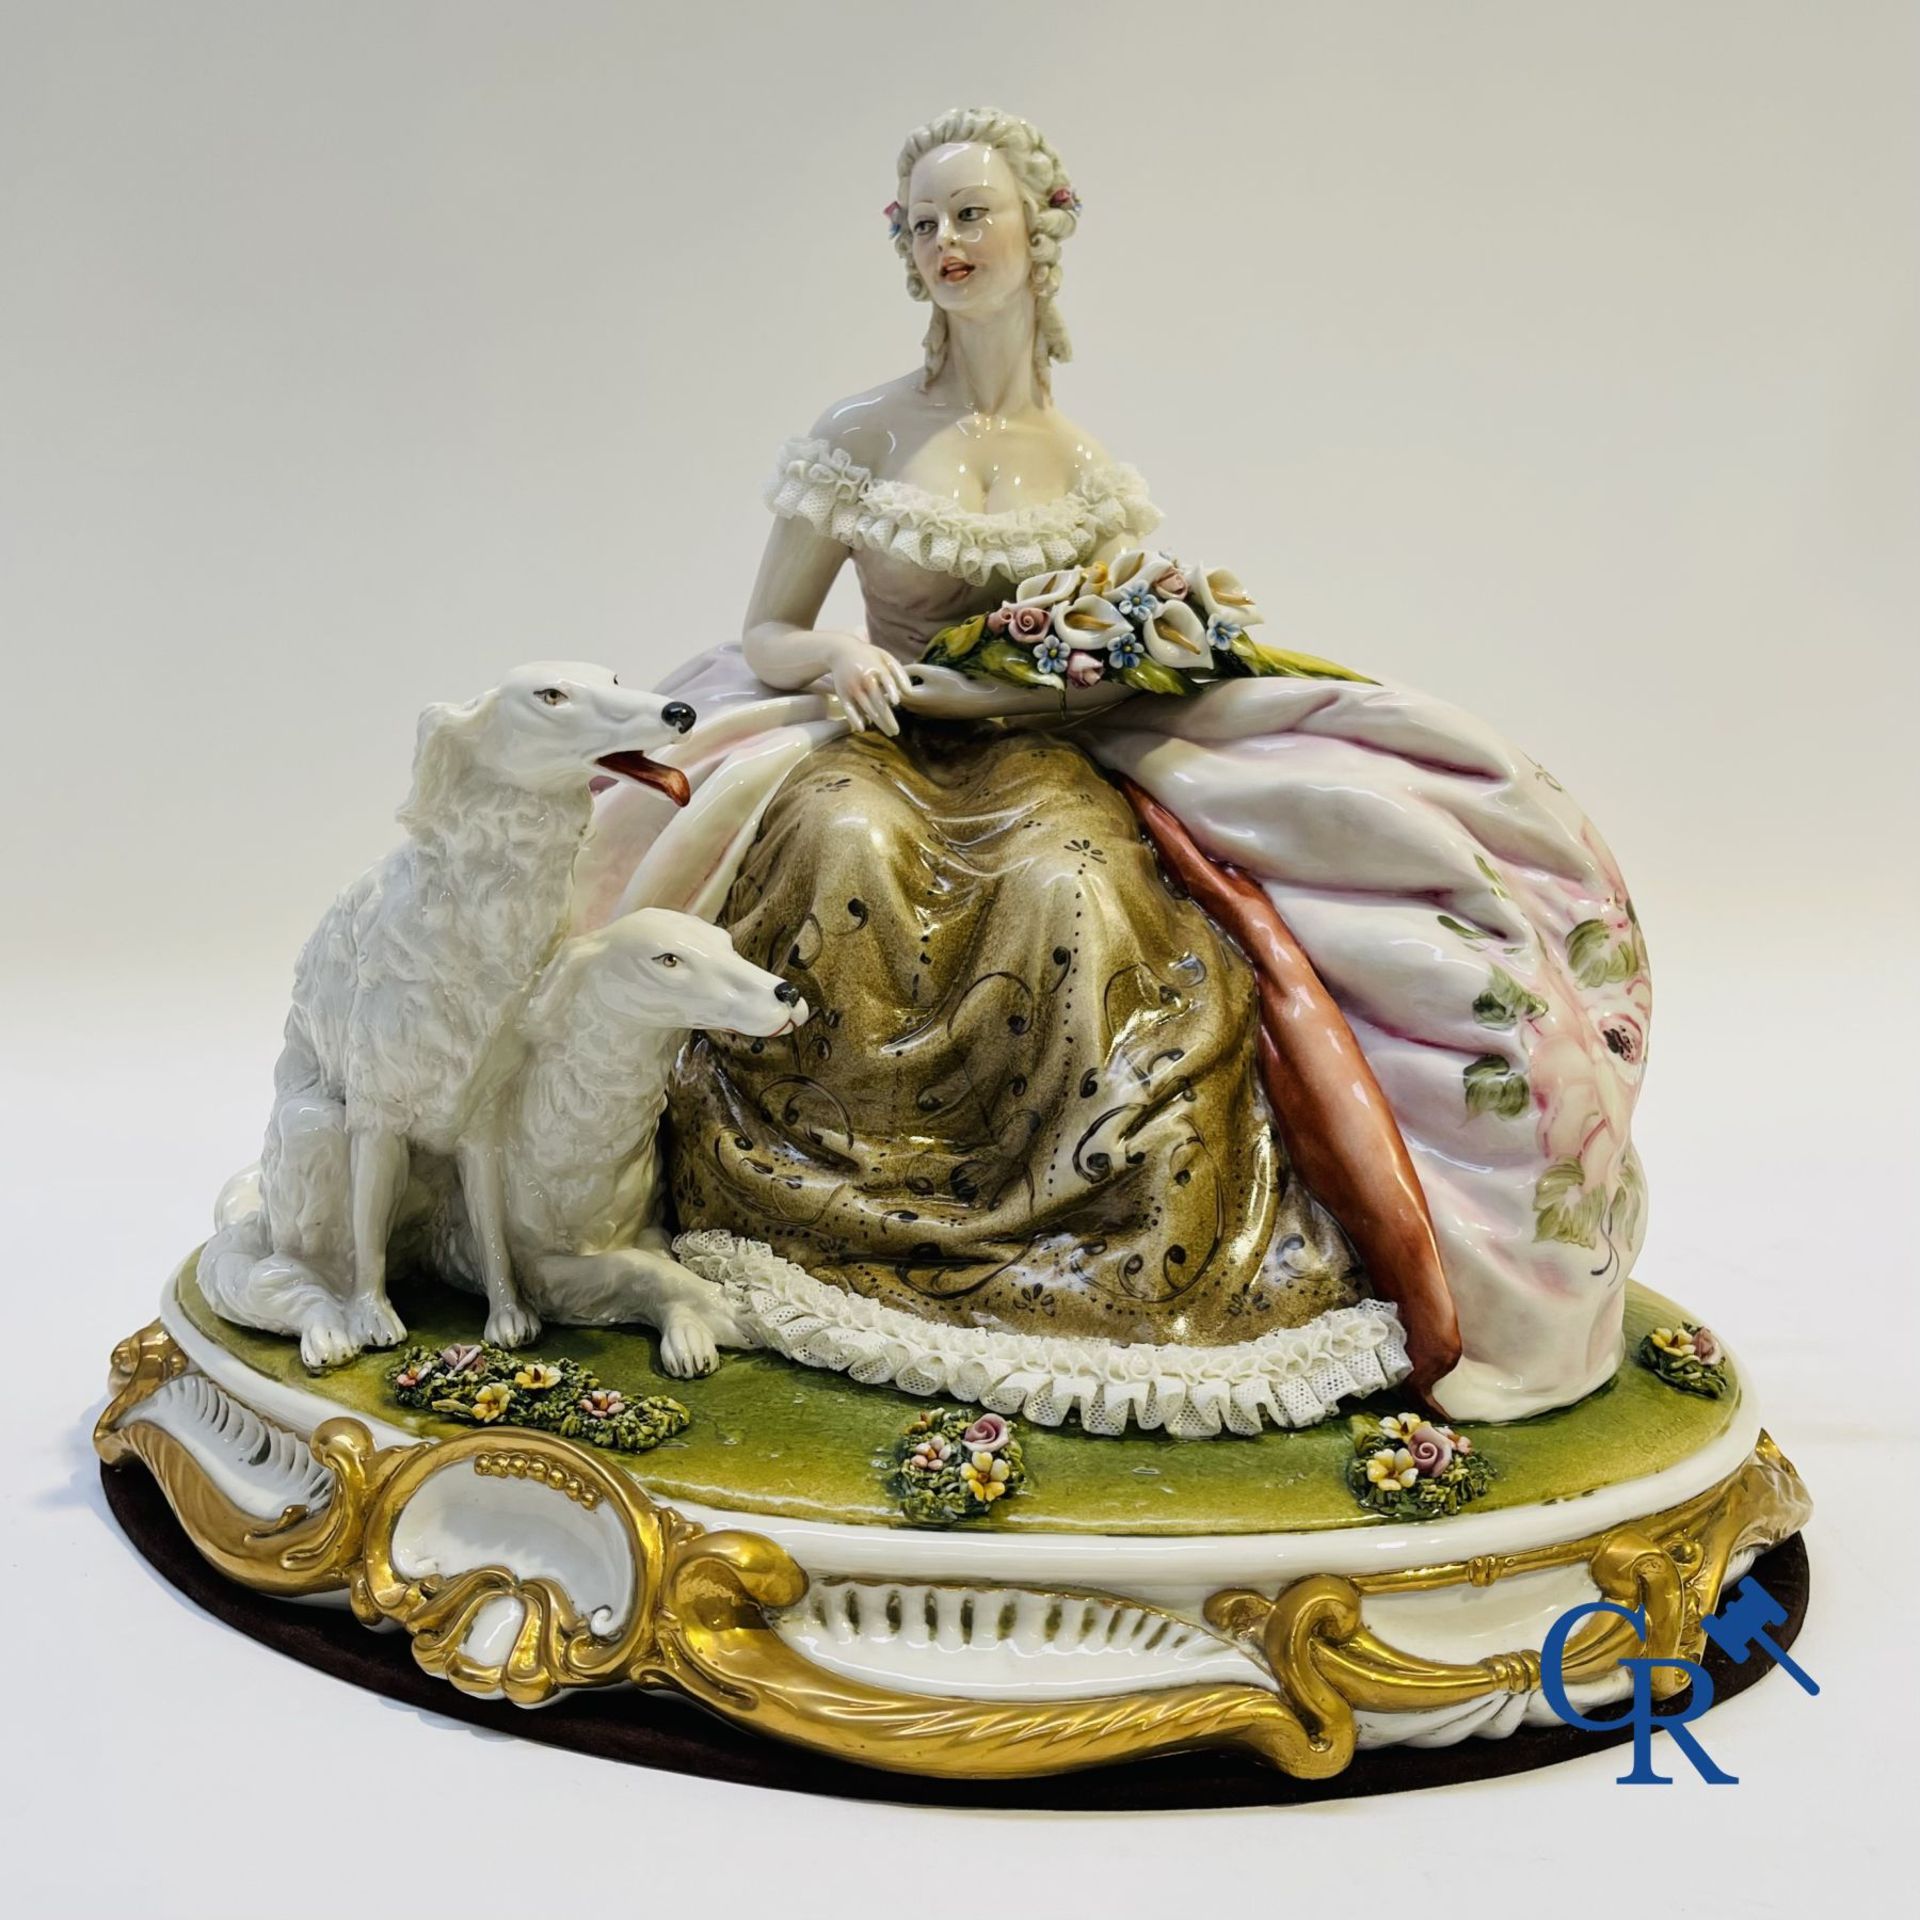 Porcelain: Capodimonte: Exceptional group in Italian porcelain with lace. - Image 4 of 8